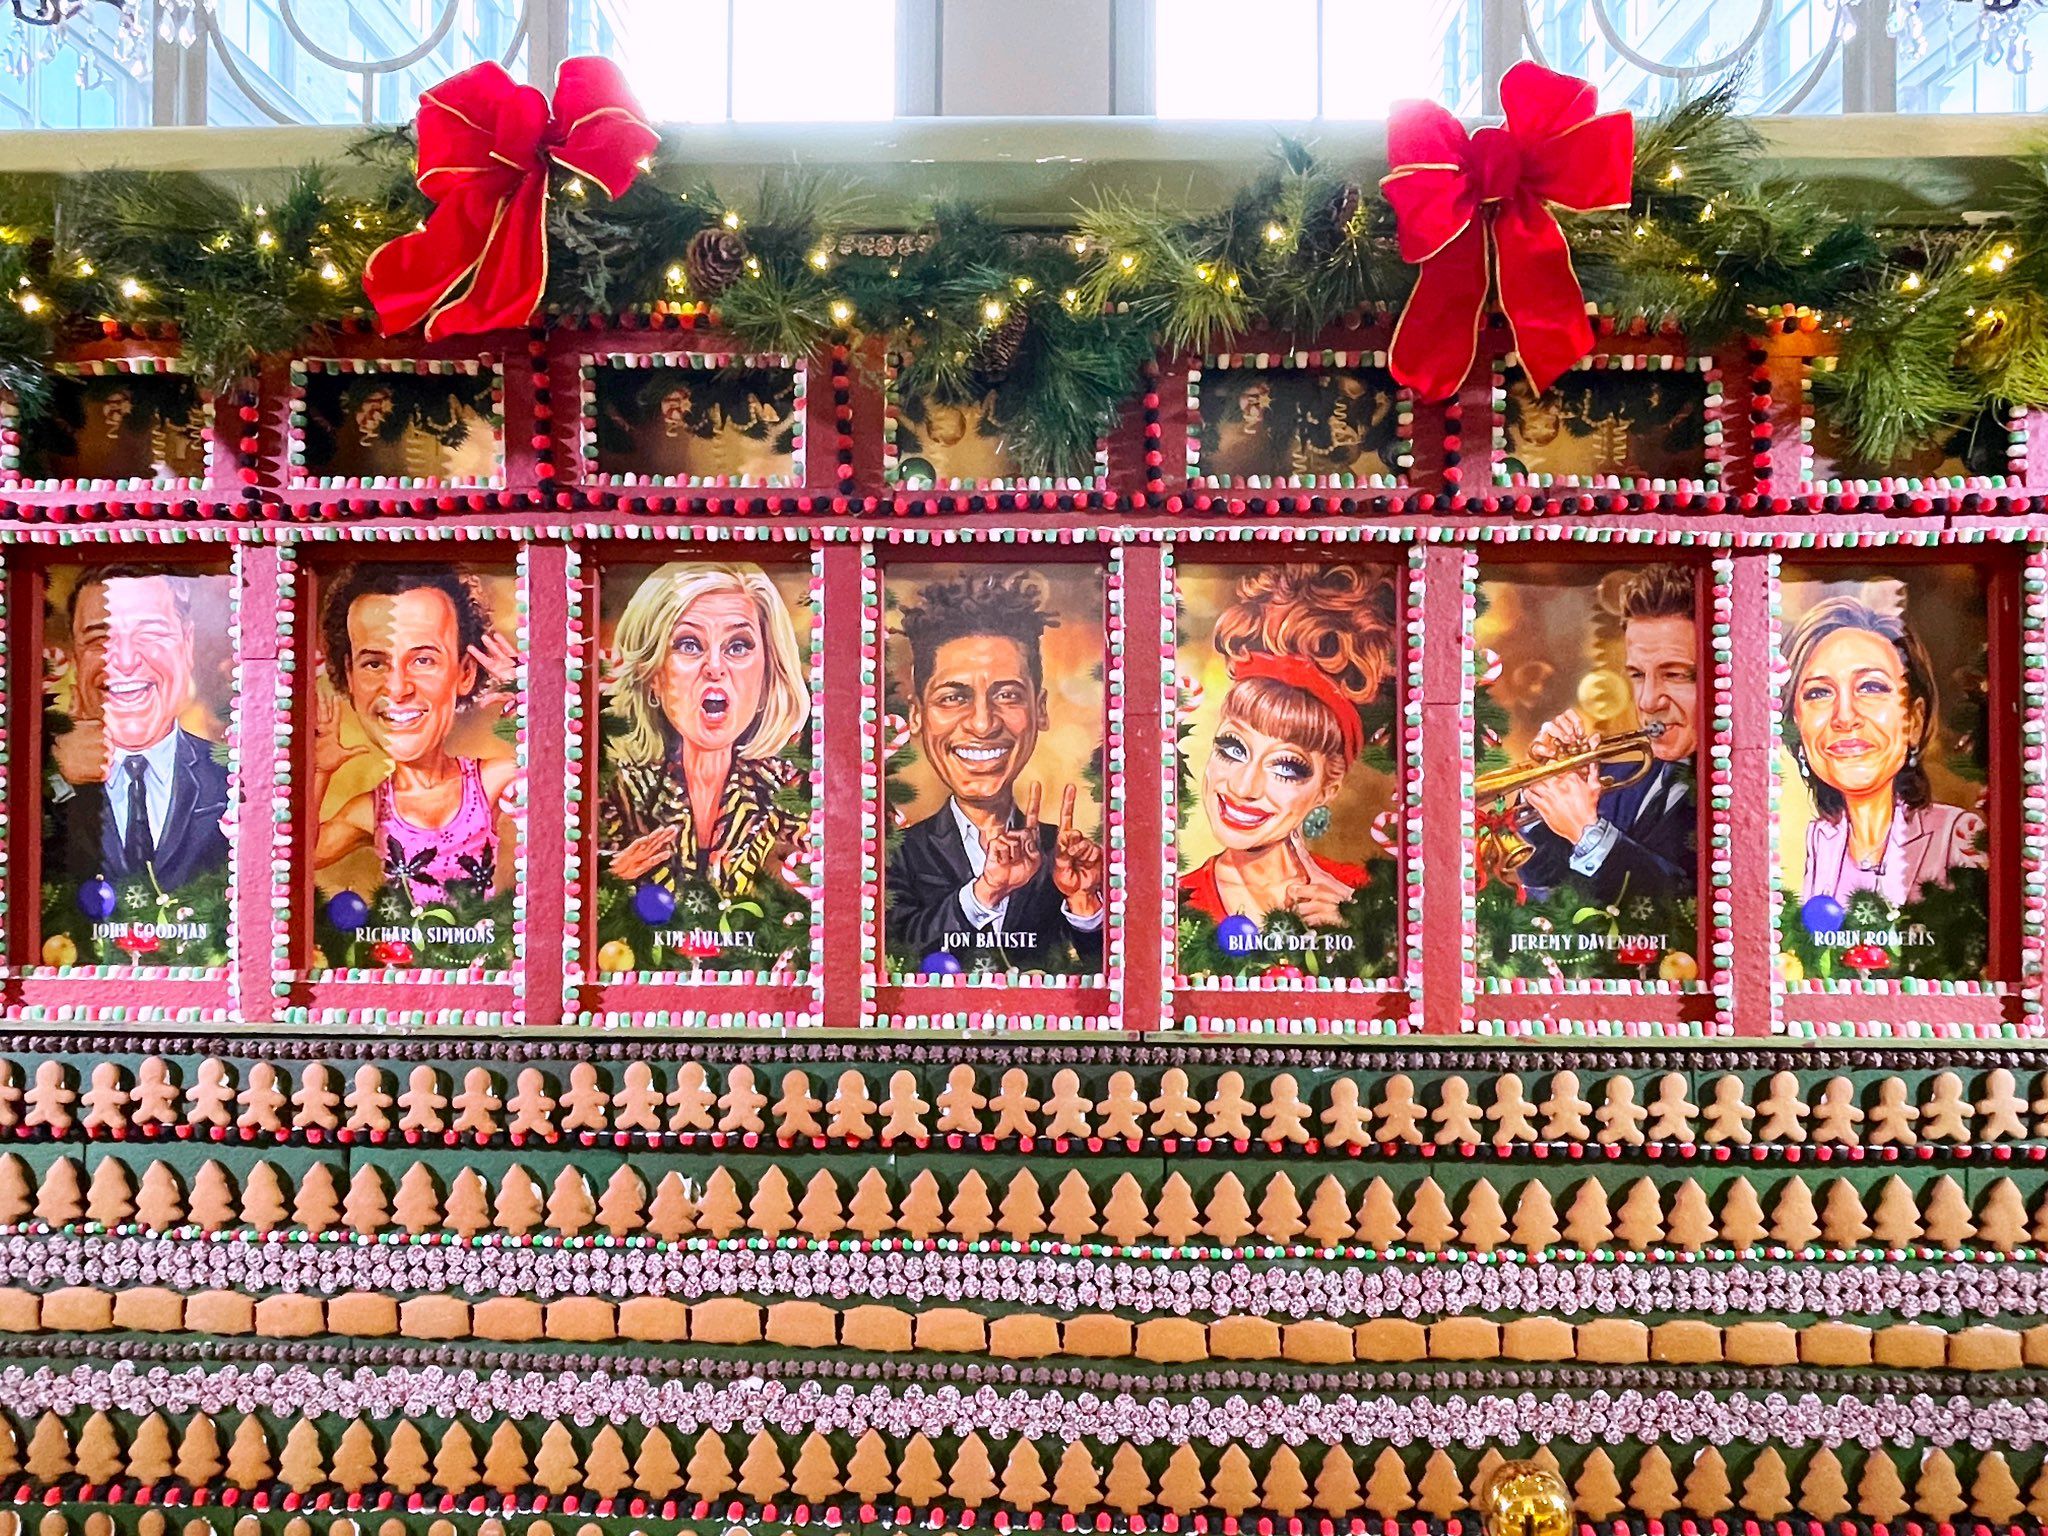 Photo shows portraits of famous people painted the side of a gingerbread streetcar